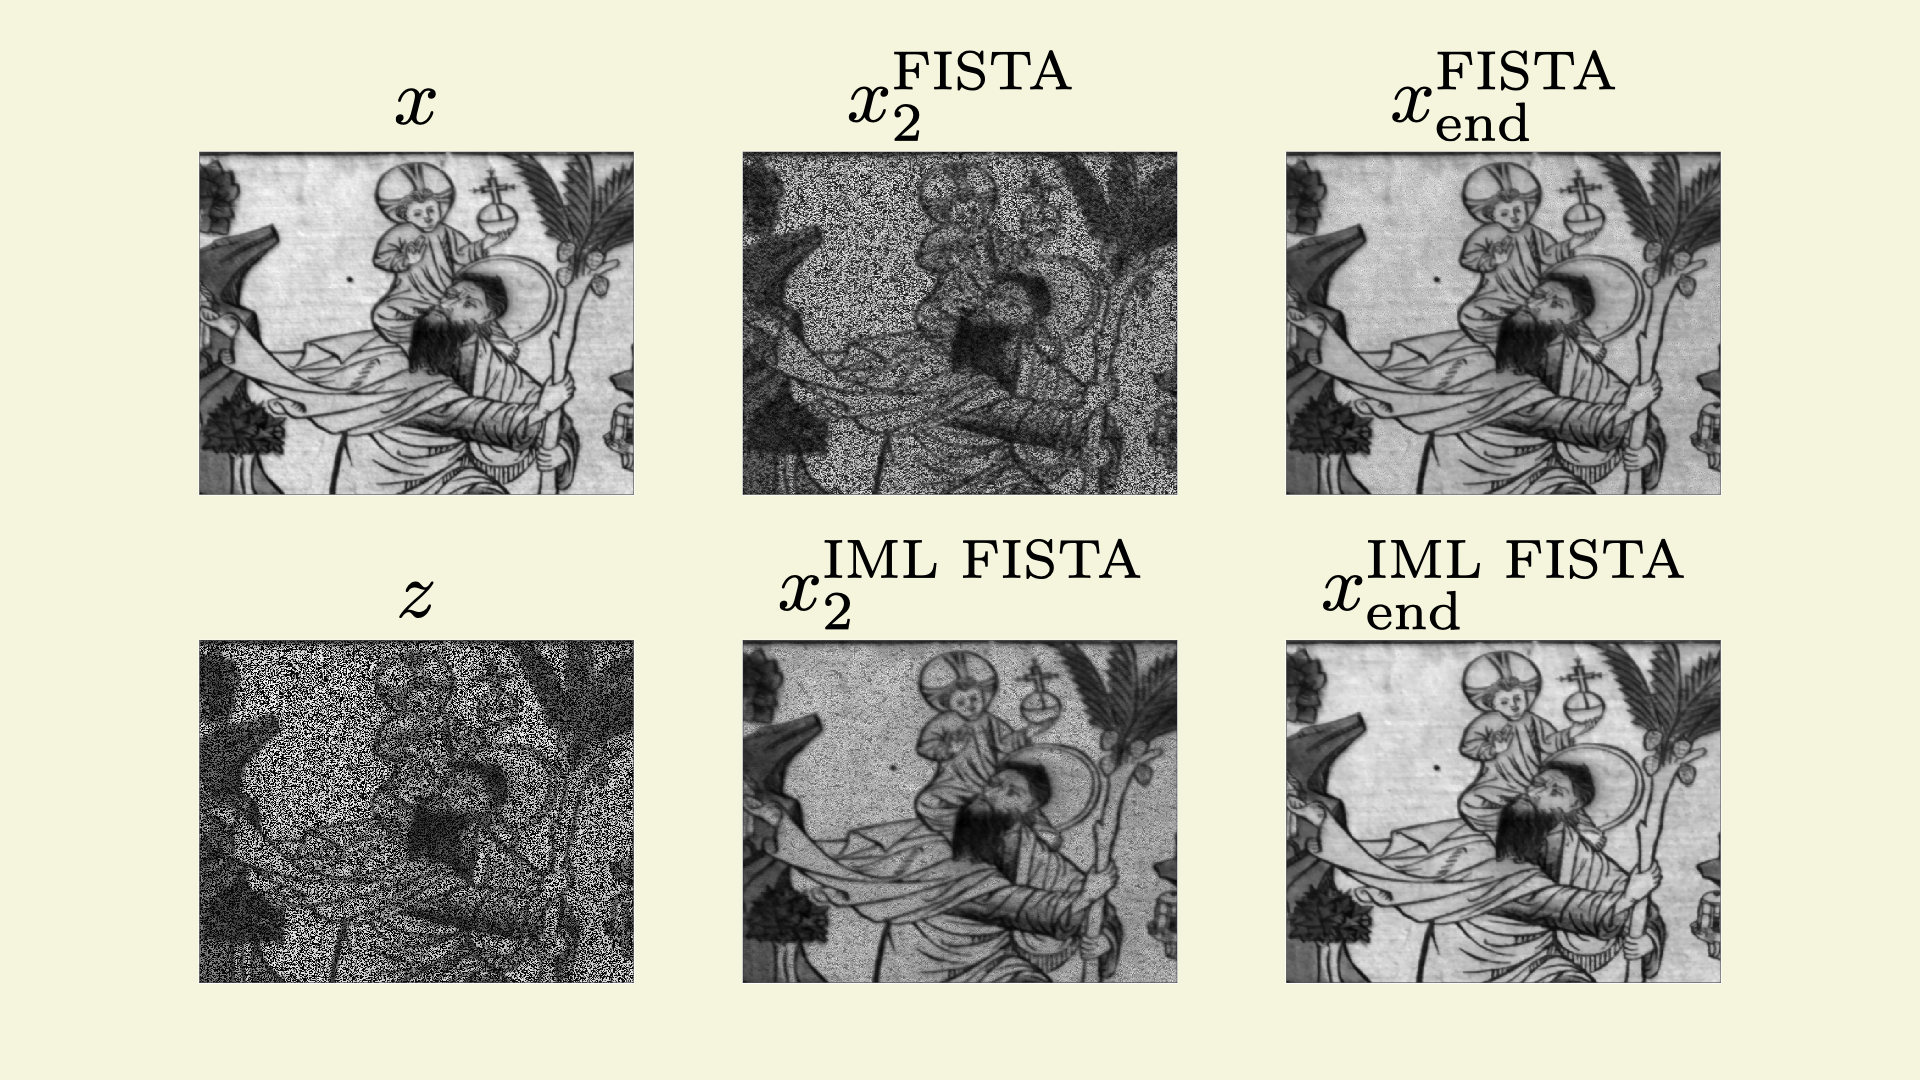 Reconstructed images with IML FISTA